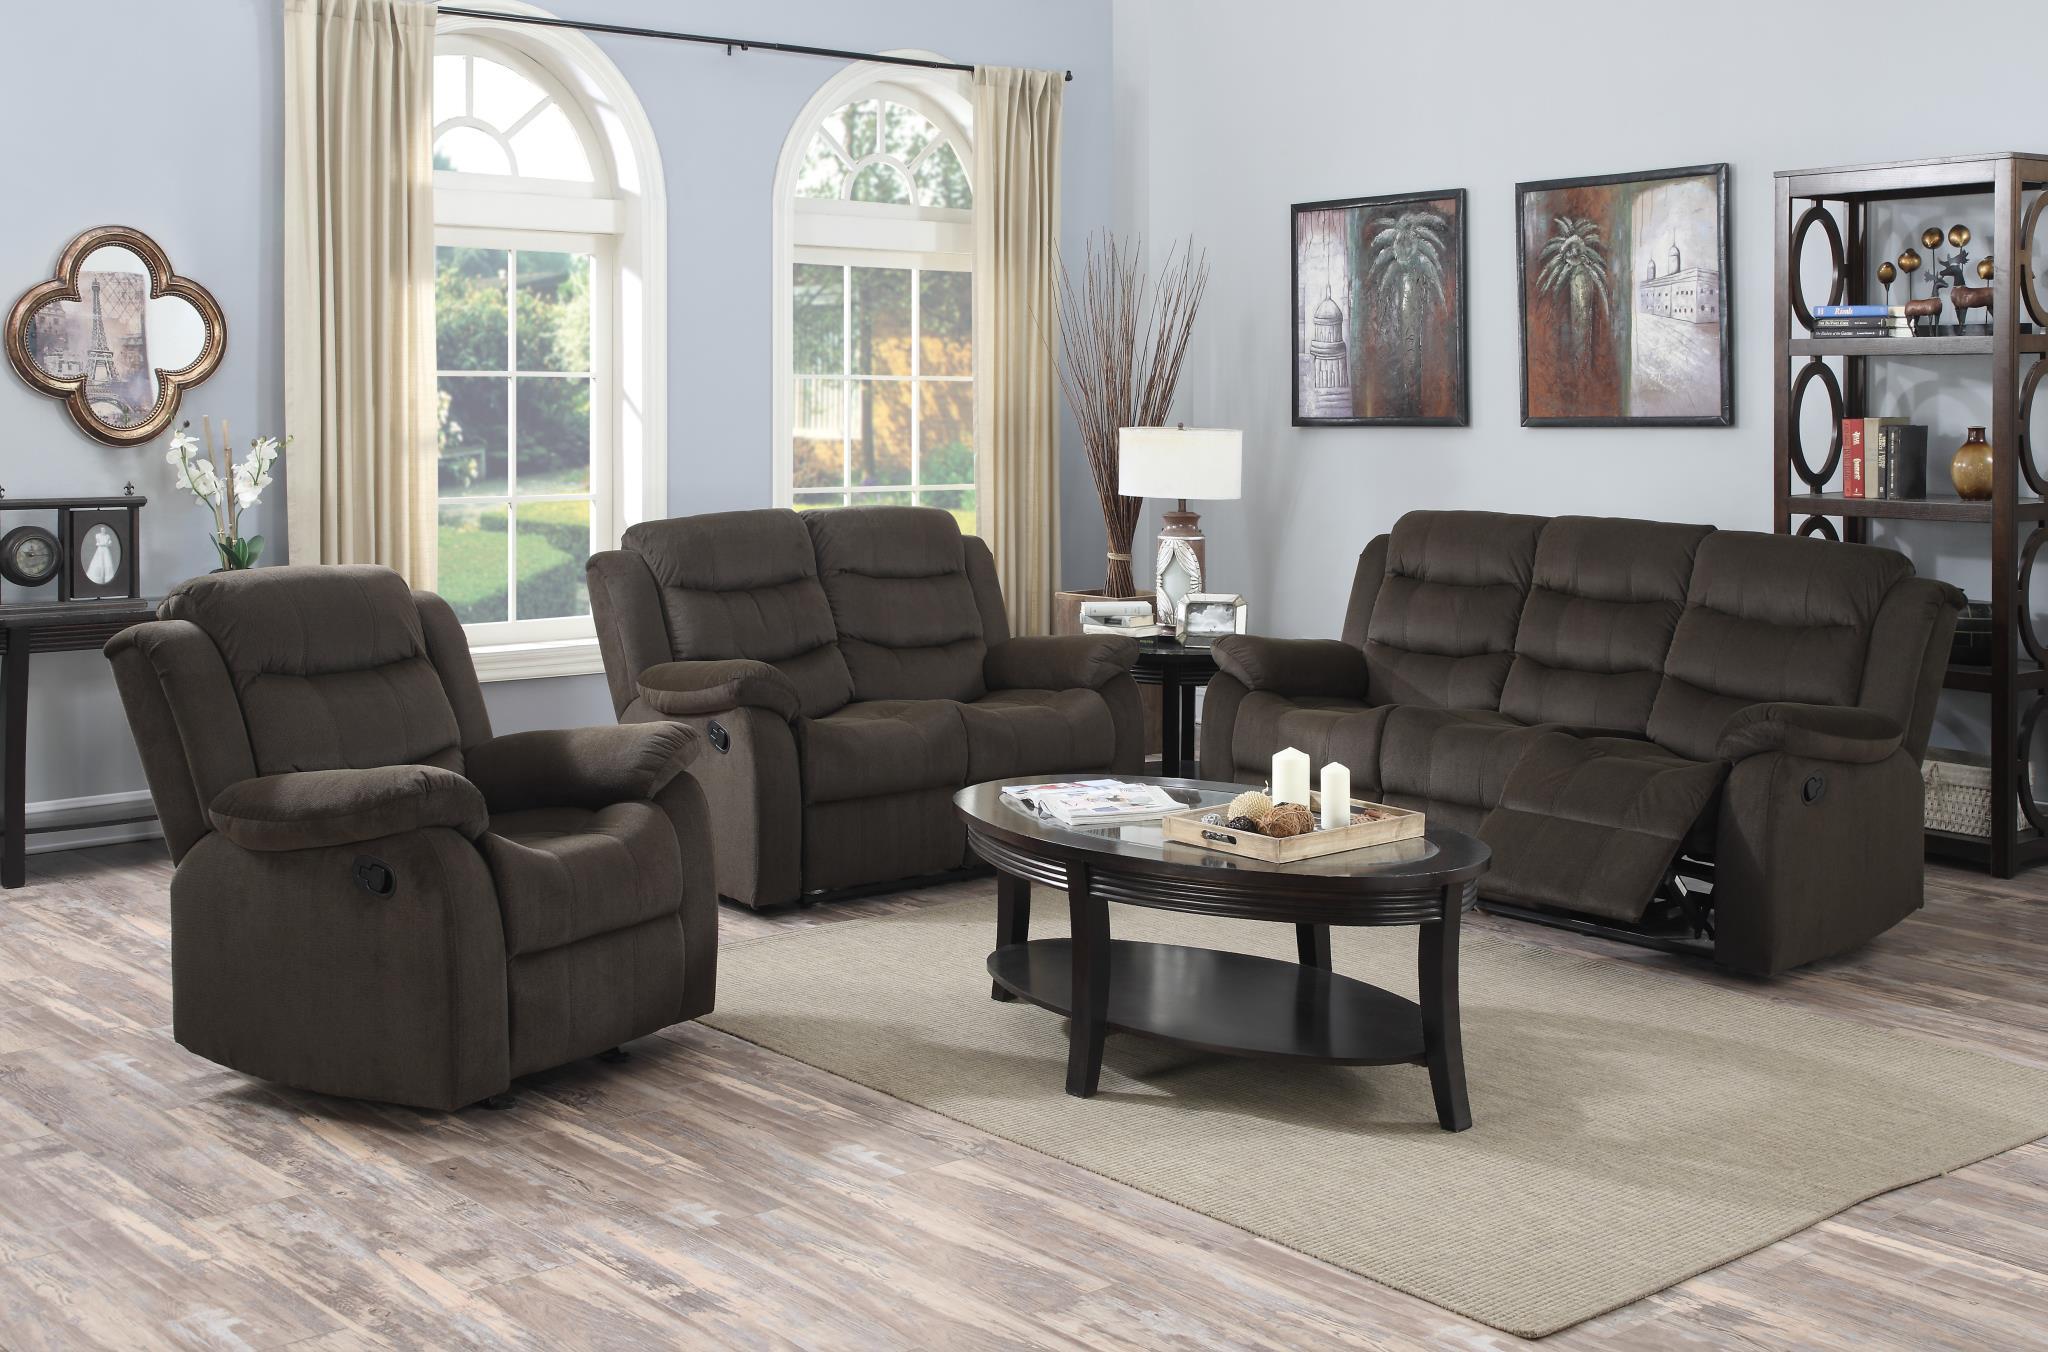 Classic, Traditional Sectional Living Room Set Candice 2005-BR-Set-3 in Brown Microfiber